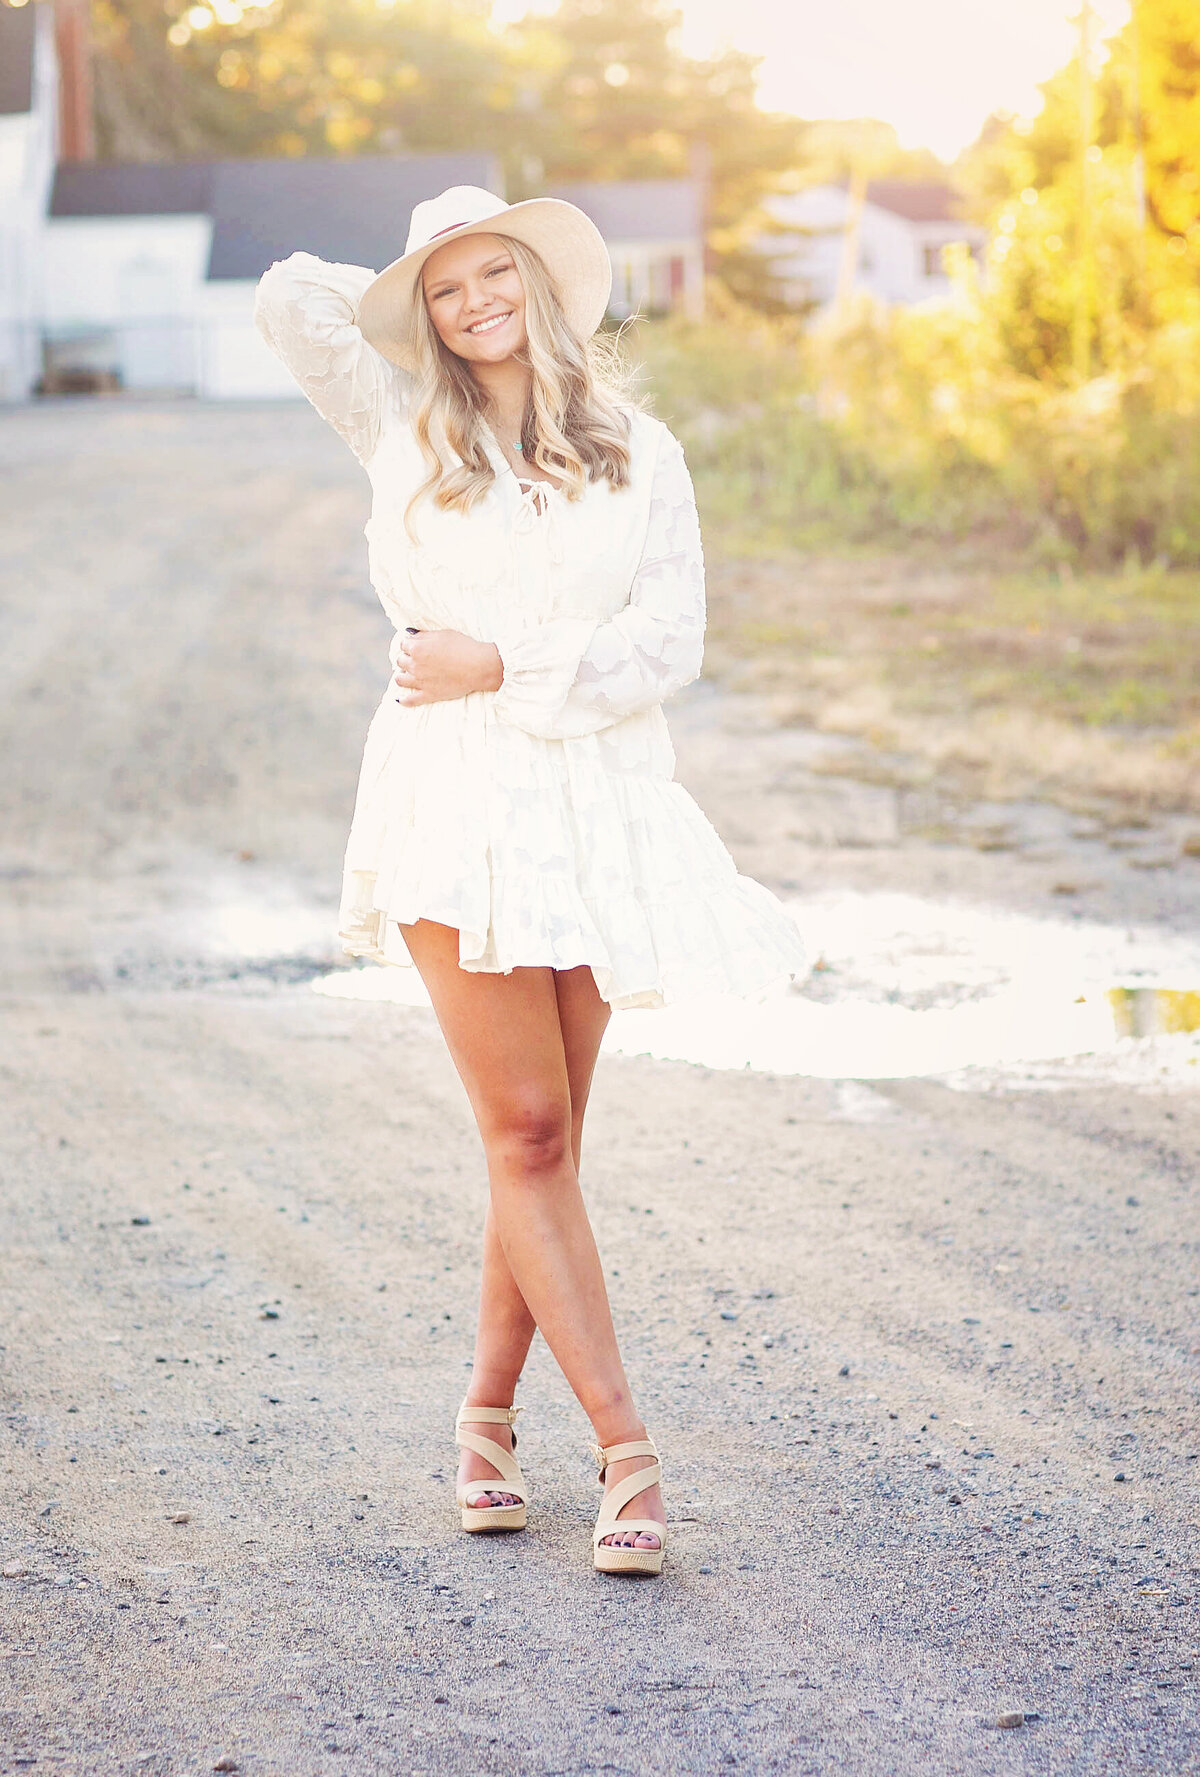 girl in hat country session - Kristen Zannella Photography